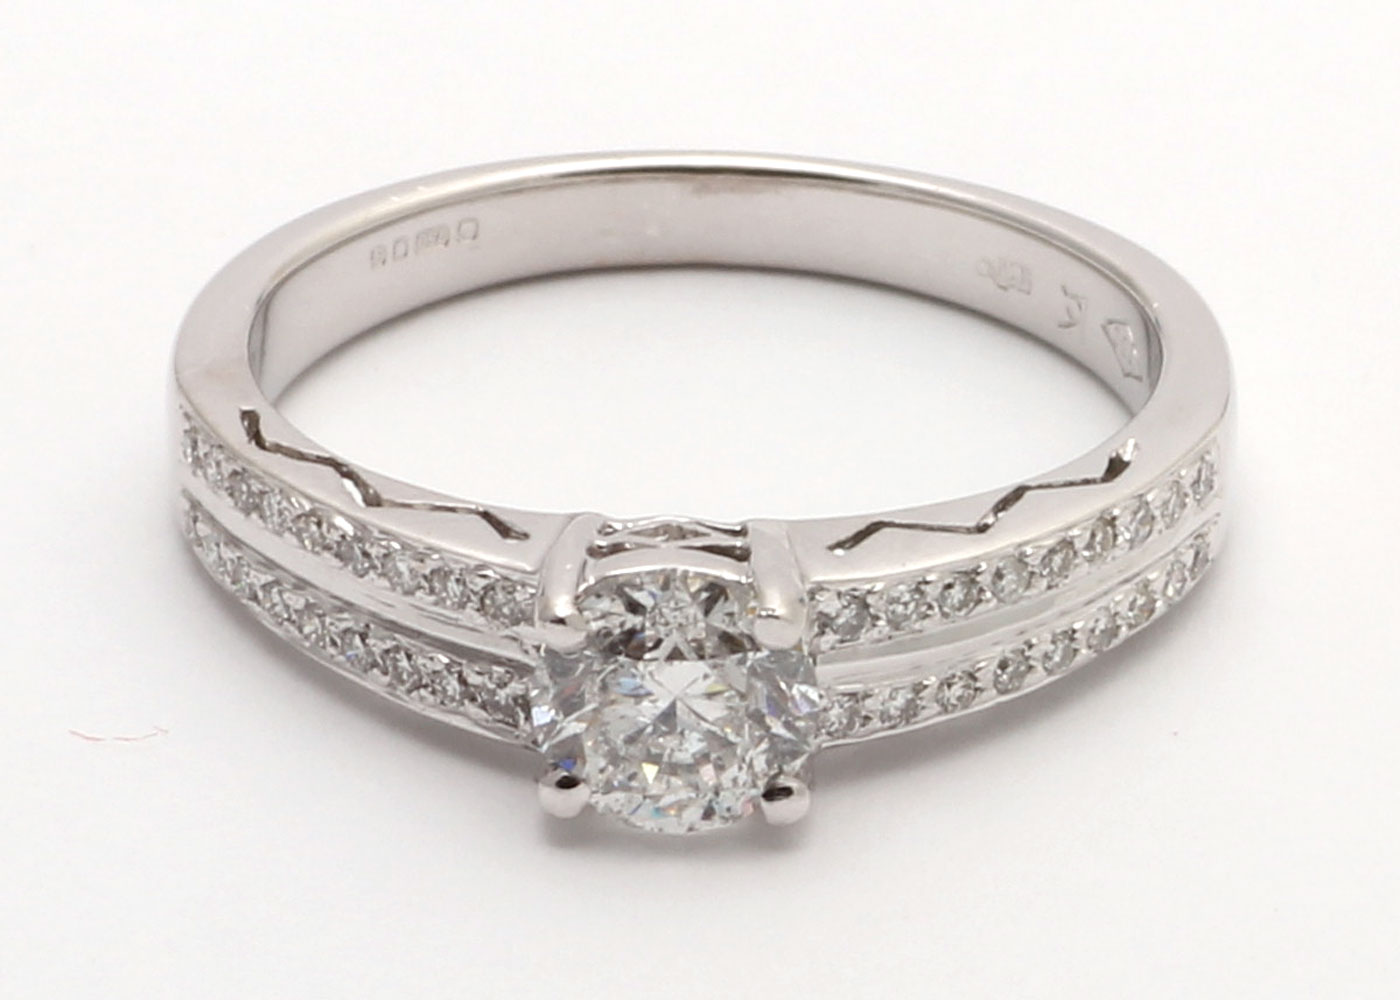 18k White Gold Diamond Ring With Double Chanel Set Shoulders 0.83 Carats - Image 5 of 6